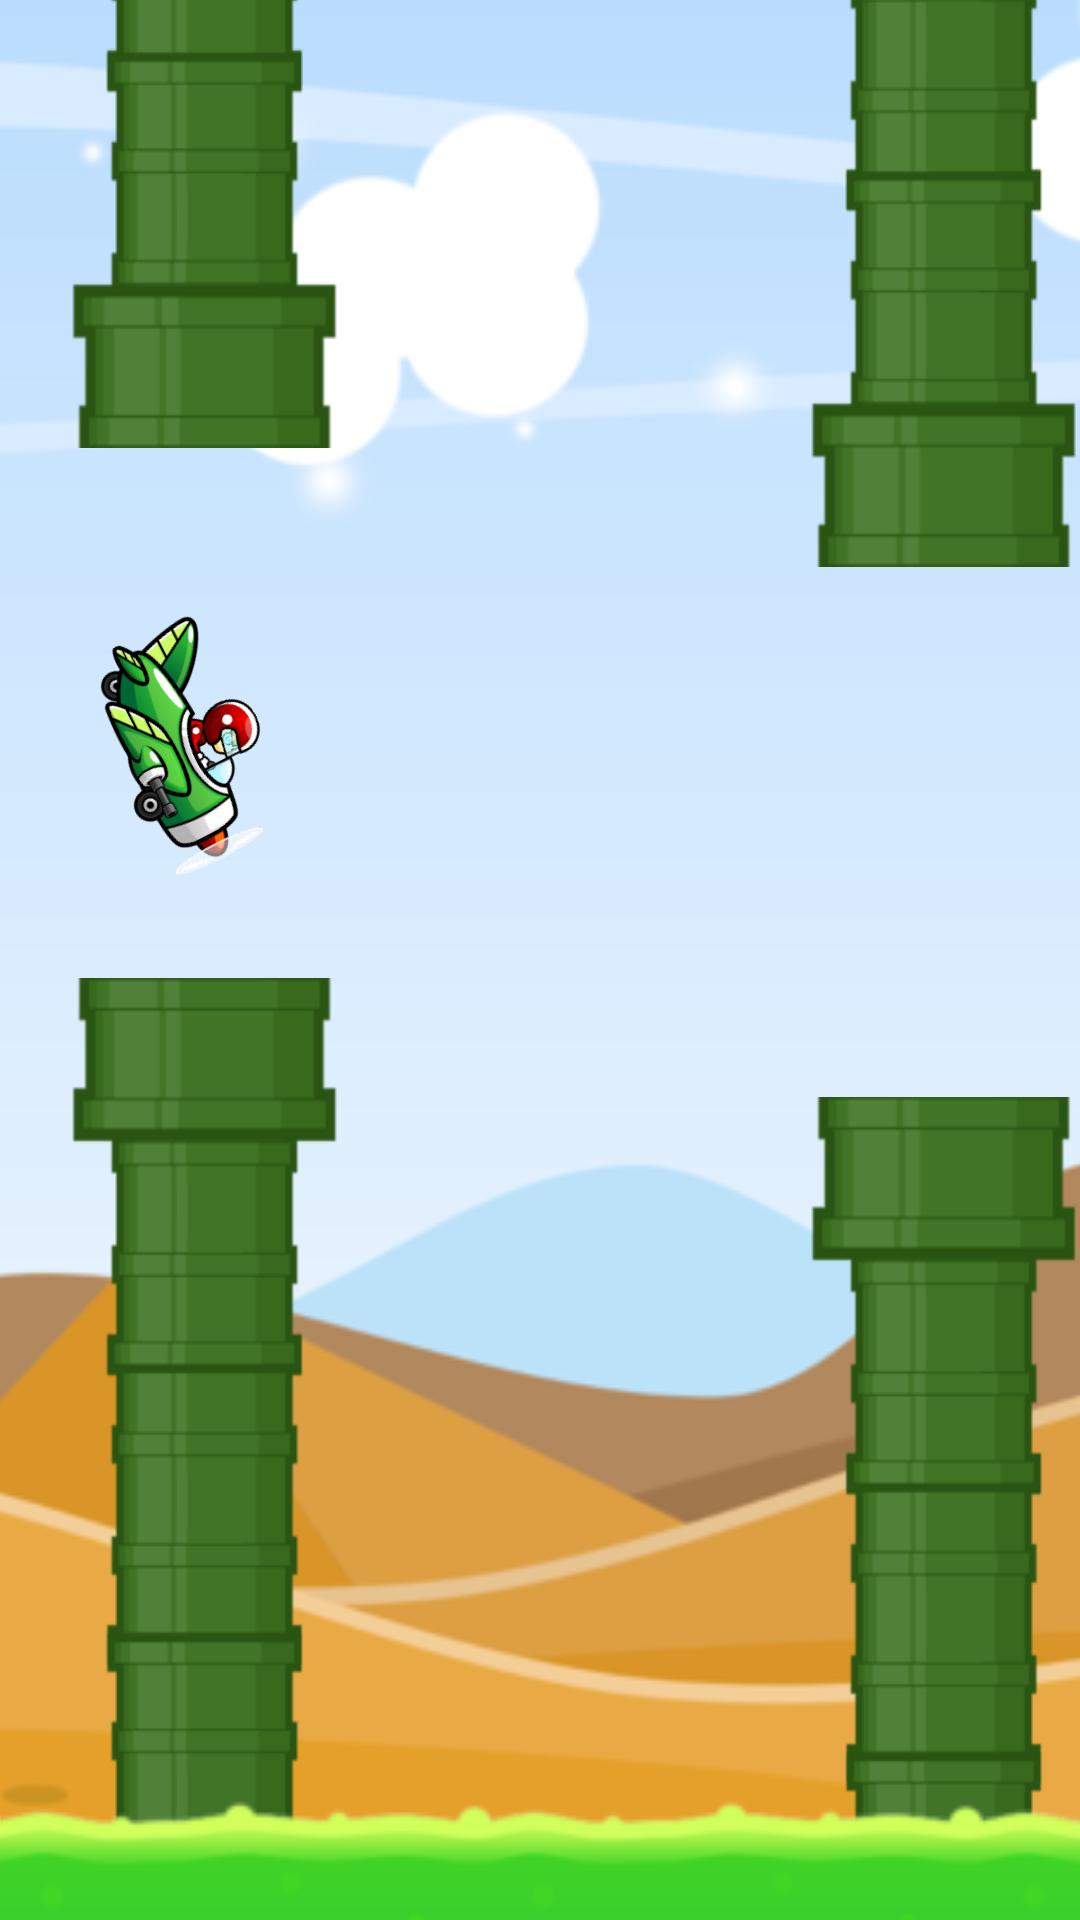 Flappy Plane - Flappy Tap Game for Android - APK Download